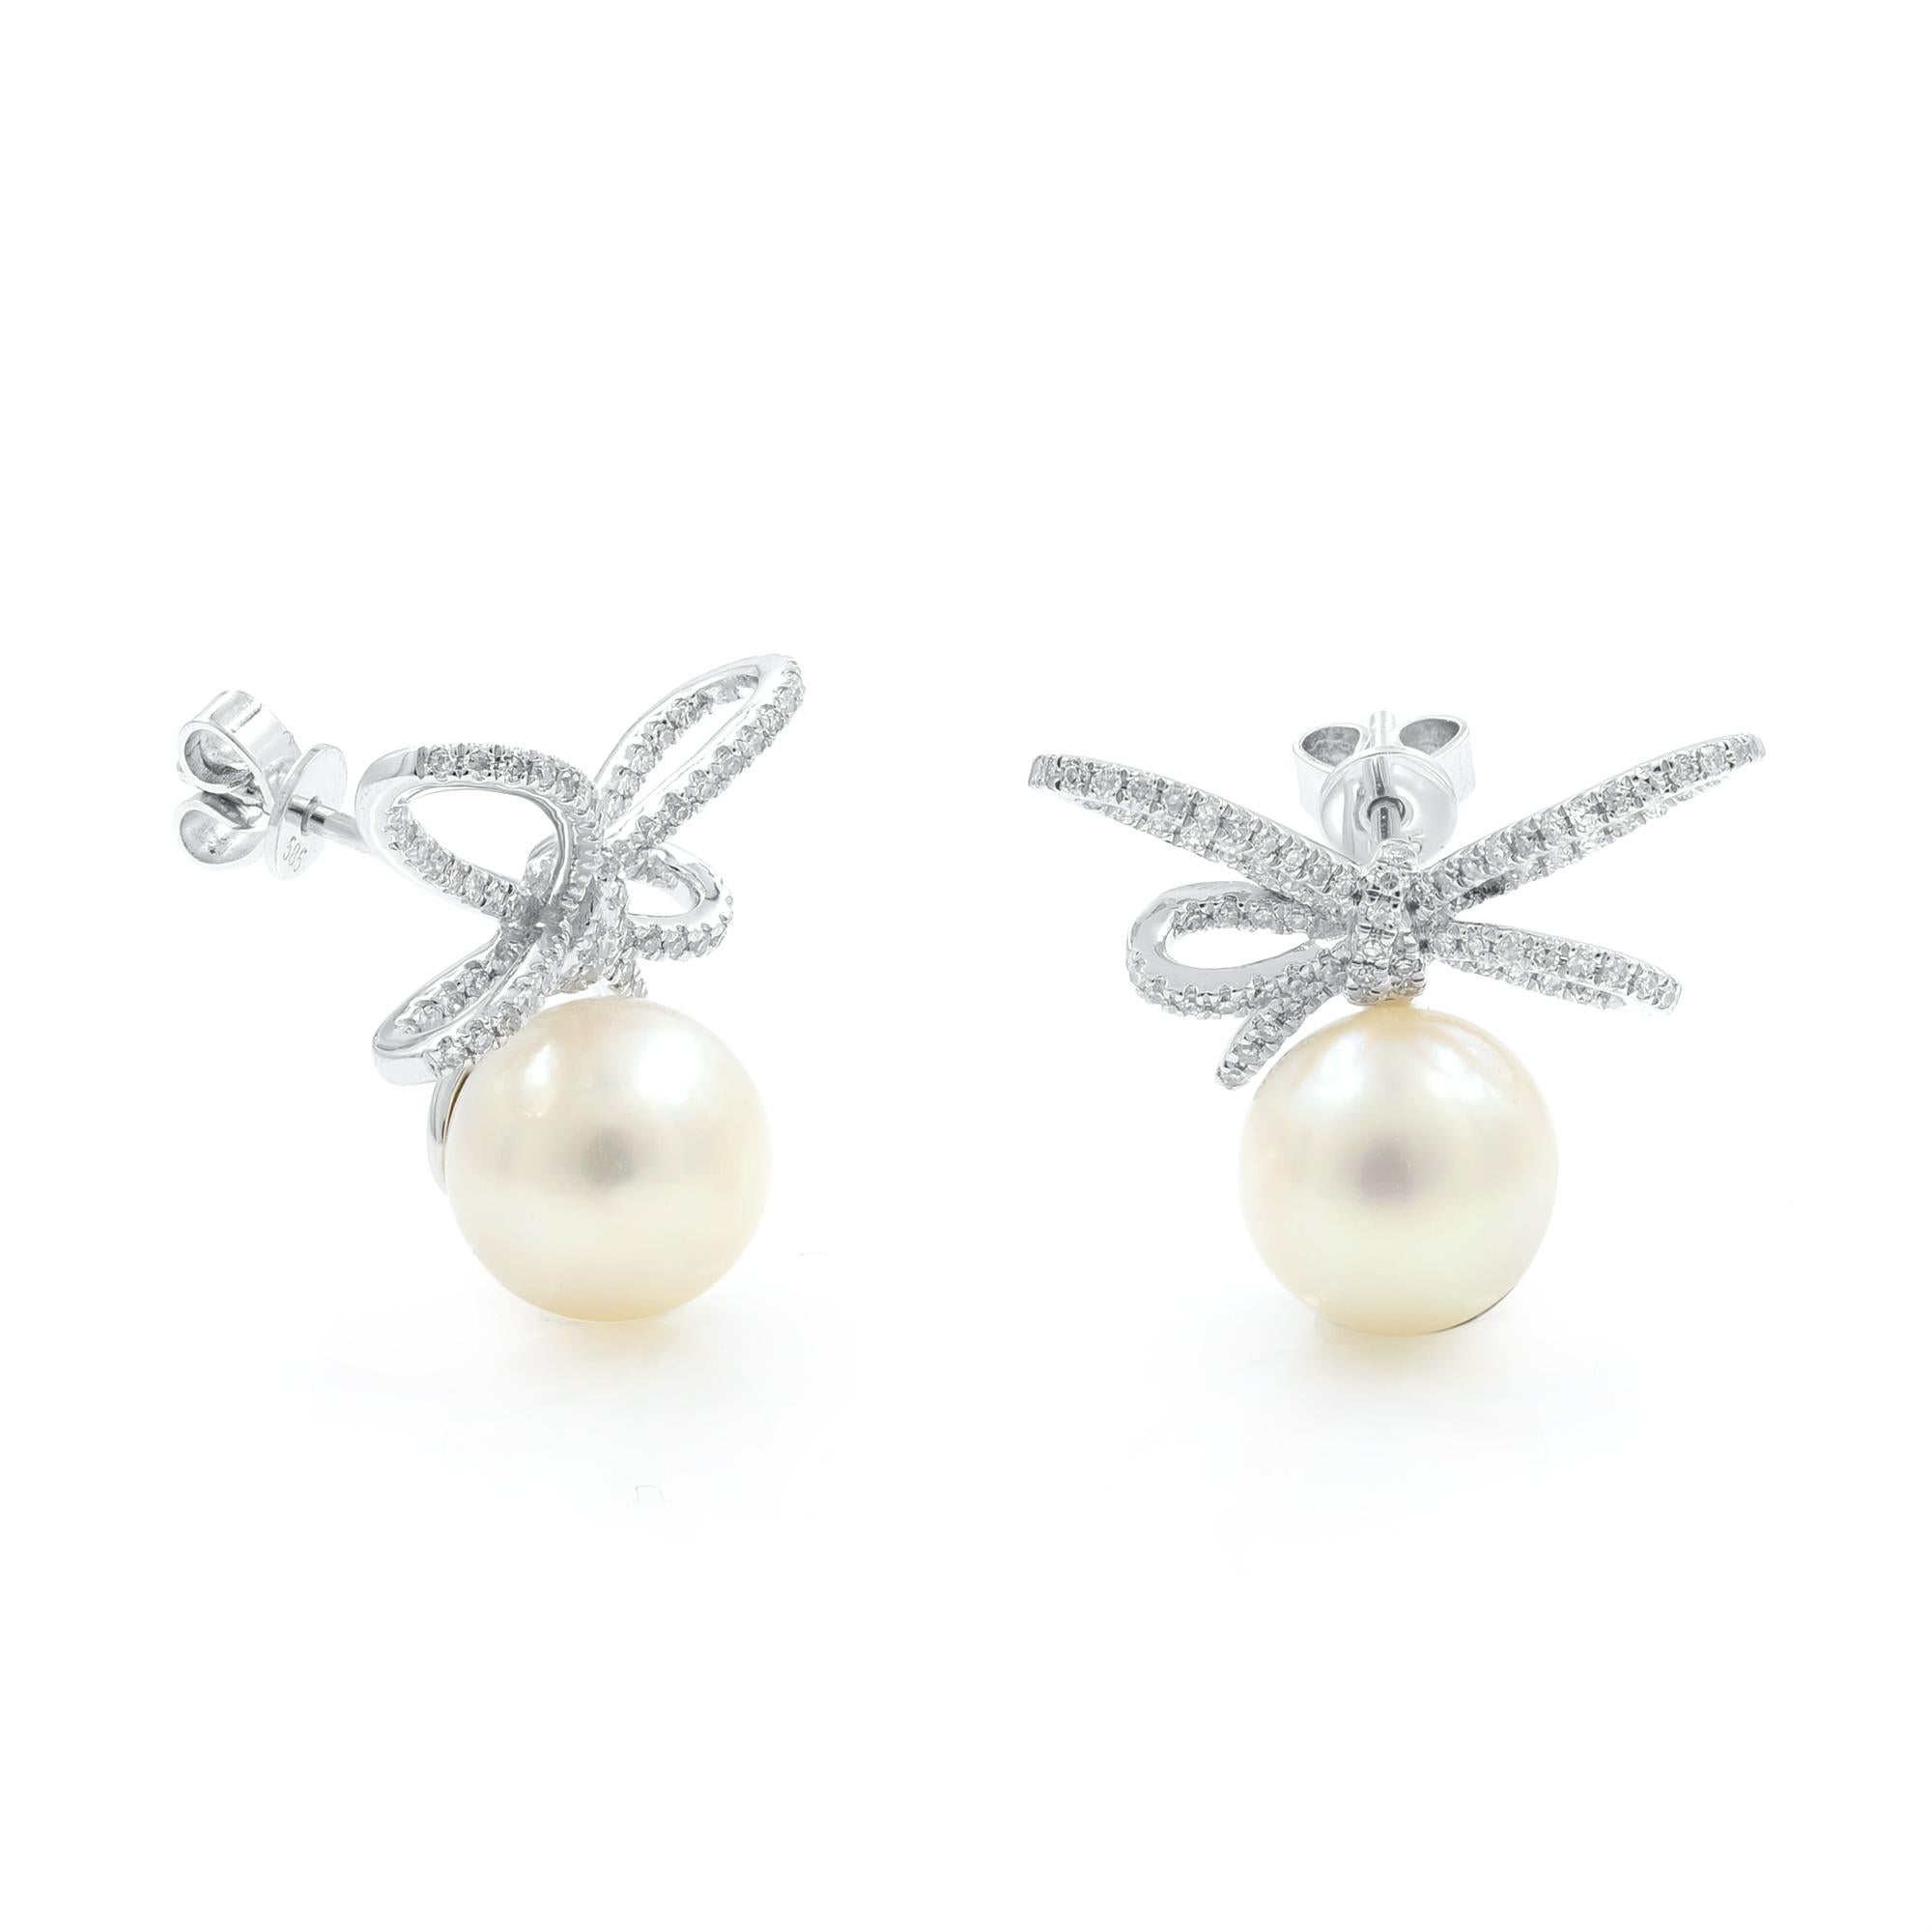 Brand new trendy jewelry with real gold real diamonds!
This beautiful pearl earrings are crafted in 14K White Gold. The stud features a single freshwater pearl and a pave diamond bow totaling in 0.47 carat. This earrings brings a beautiful twist to